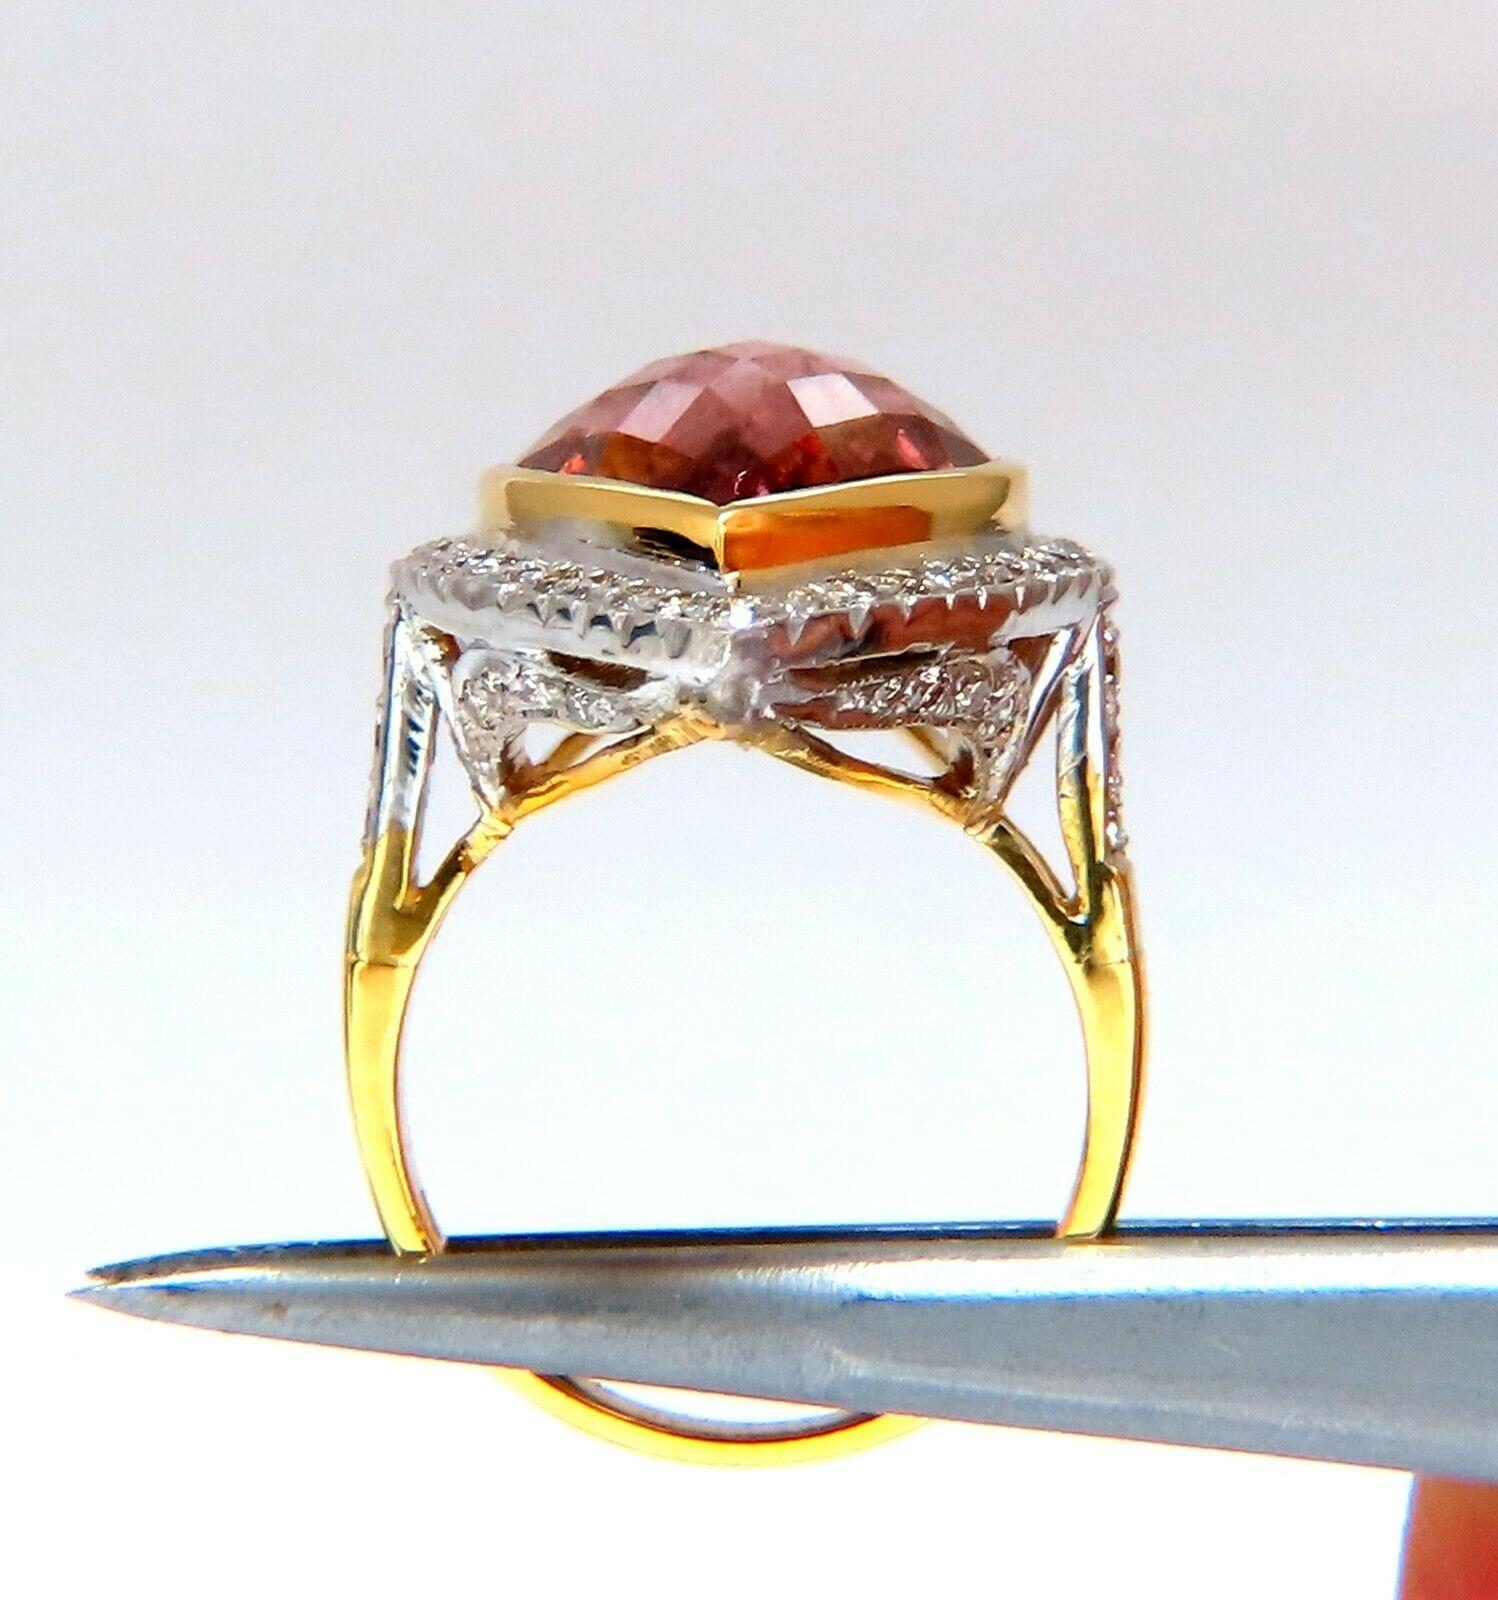 16ct Natural Purple Pink Tourmaline Diamonds Ring 14kt For Sale 1